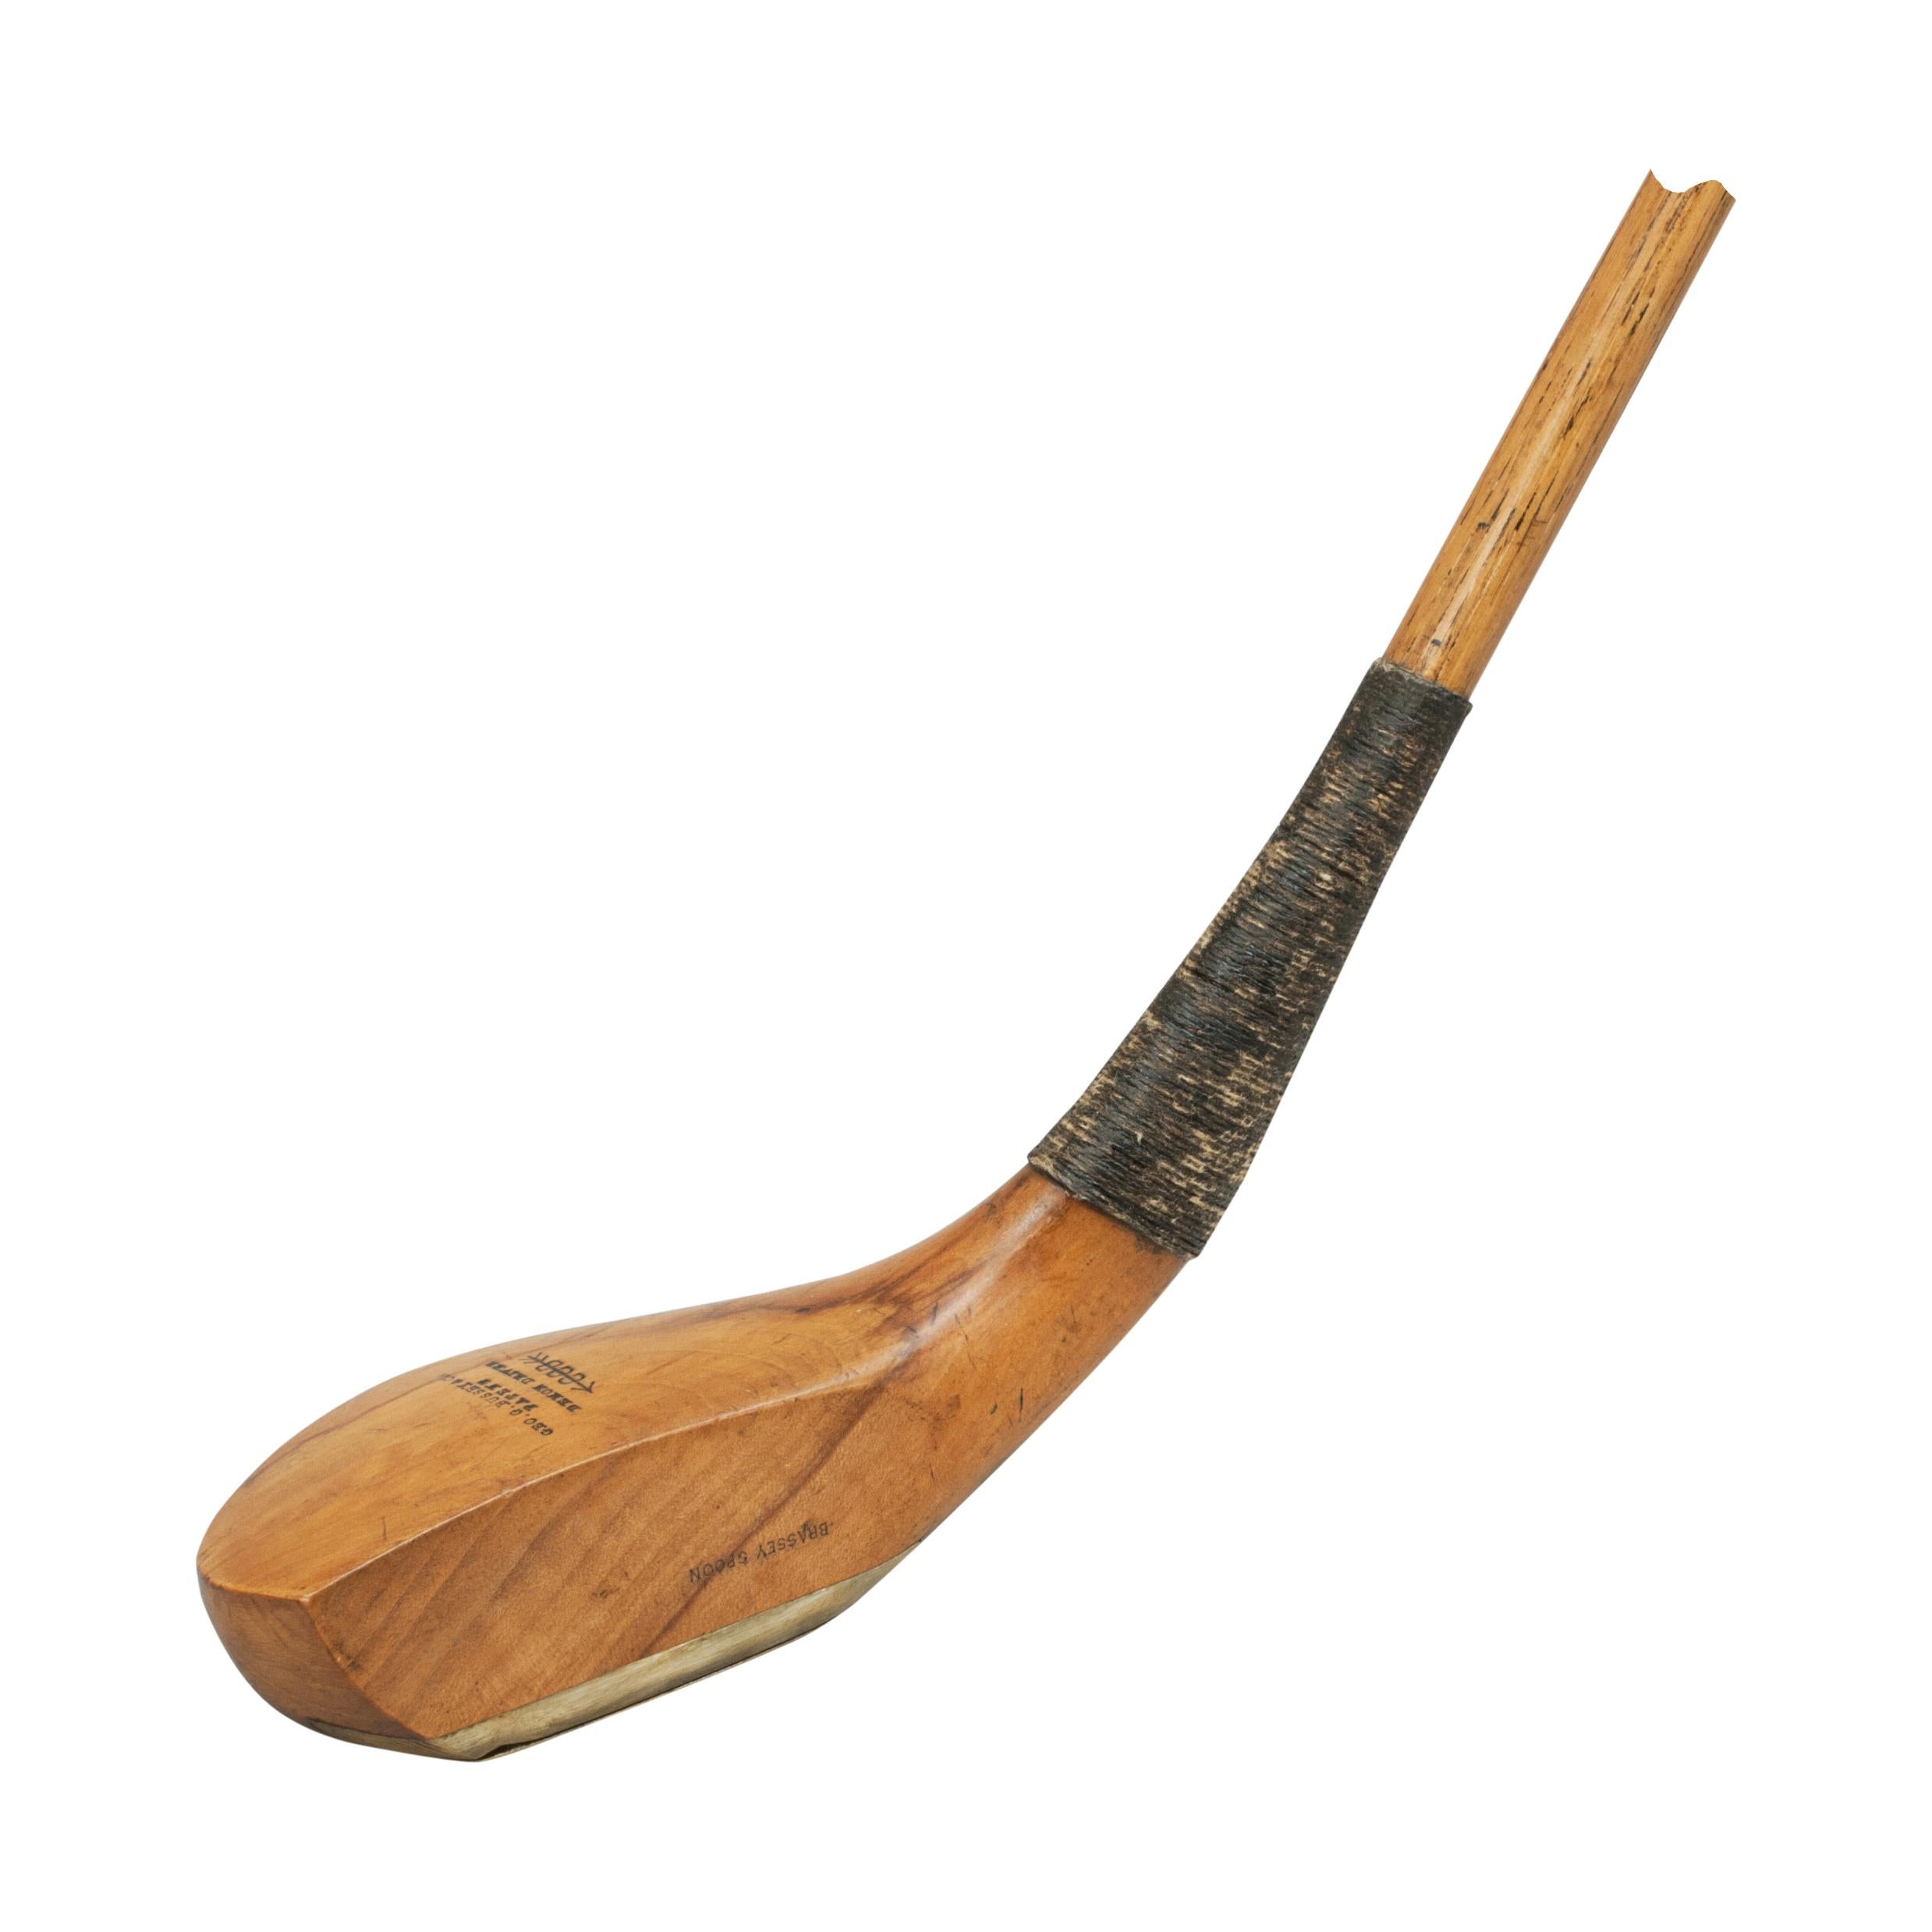 George Bussey Transitional long nose spoon, golf club.
A superb transitional long nose spoon by George Bussey. The beautiful fruitwood head with excellent colour and good makers and model stamp 